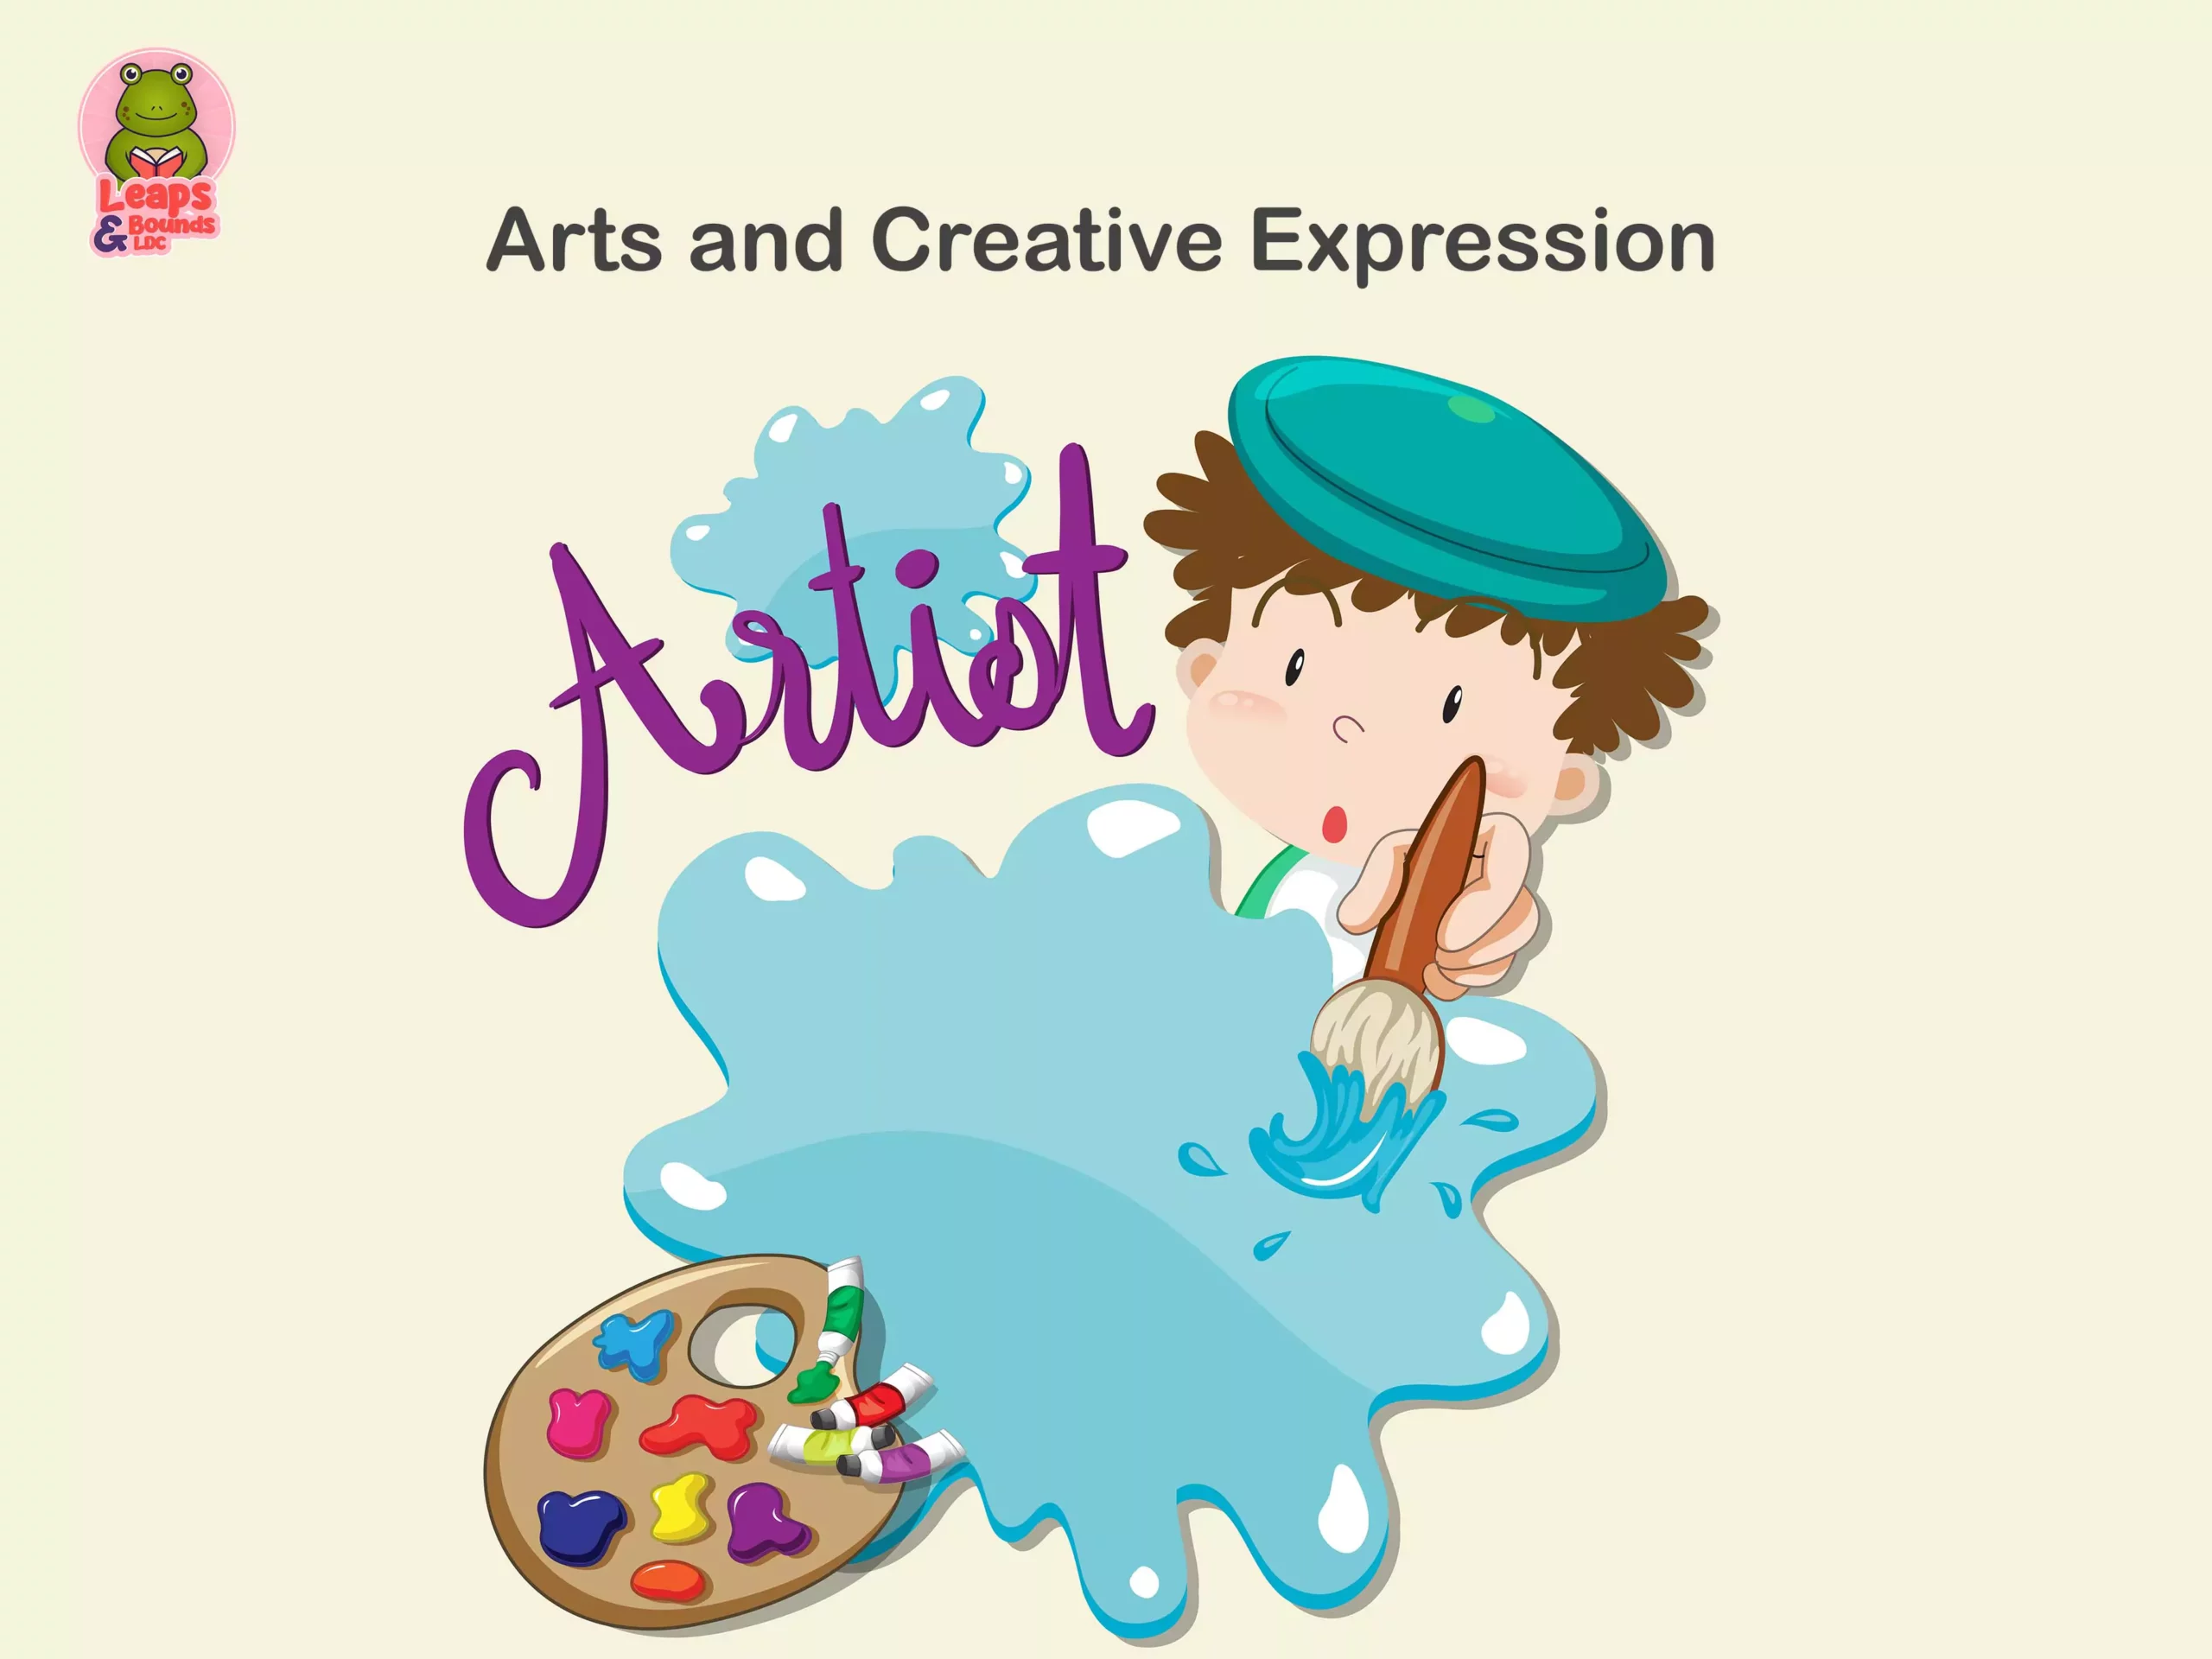 Arts and Creative Expression